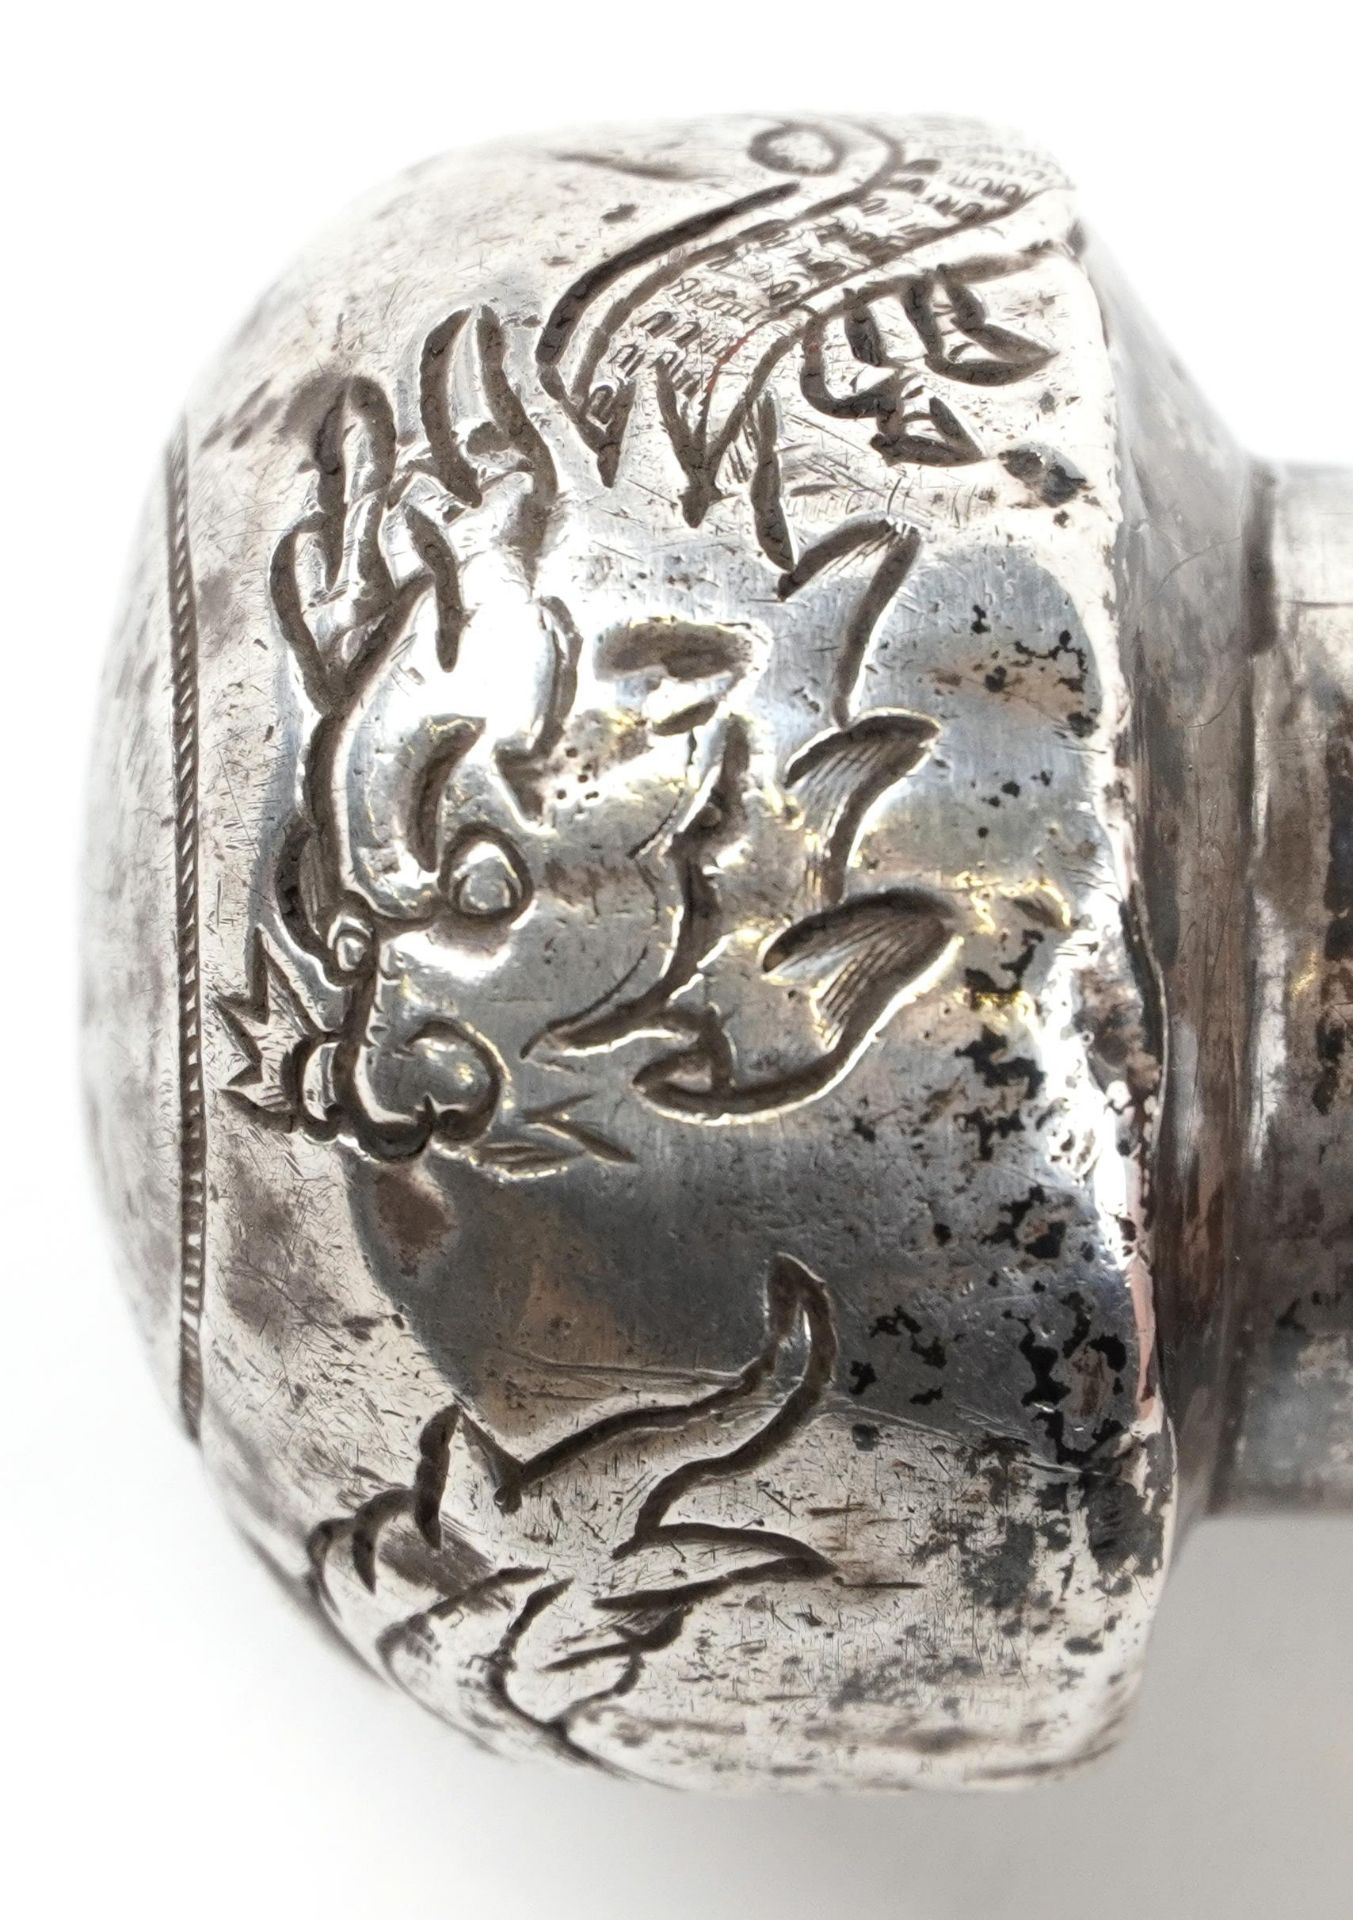 Malacca walking stick with Chinese silver pommel engraved with dragons, 85cm in length : For further - Image 6 of 7